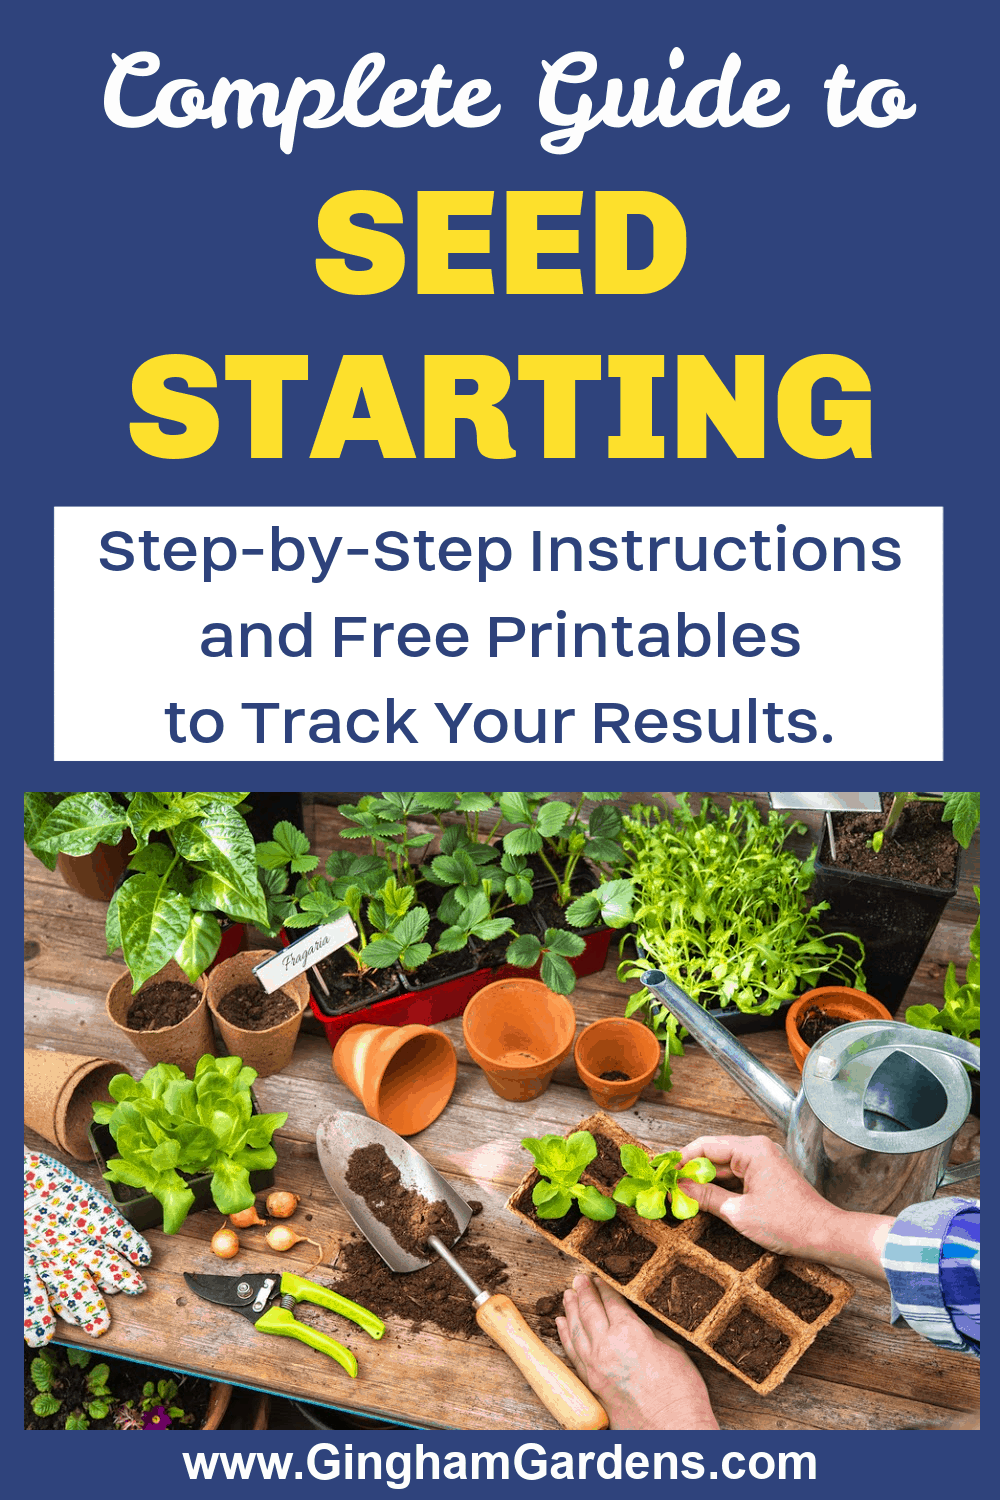 Image of Seedlings and Seed Starting Supplies with text overlay - Seed Starting